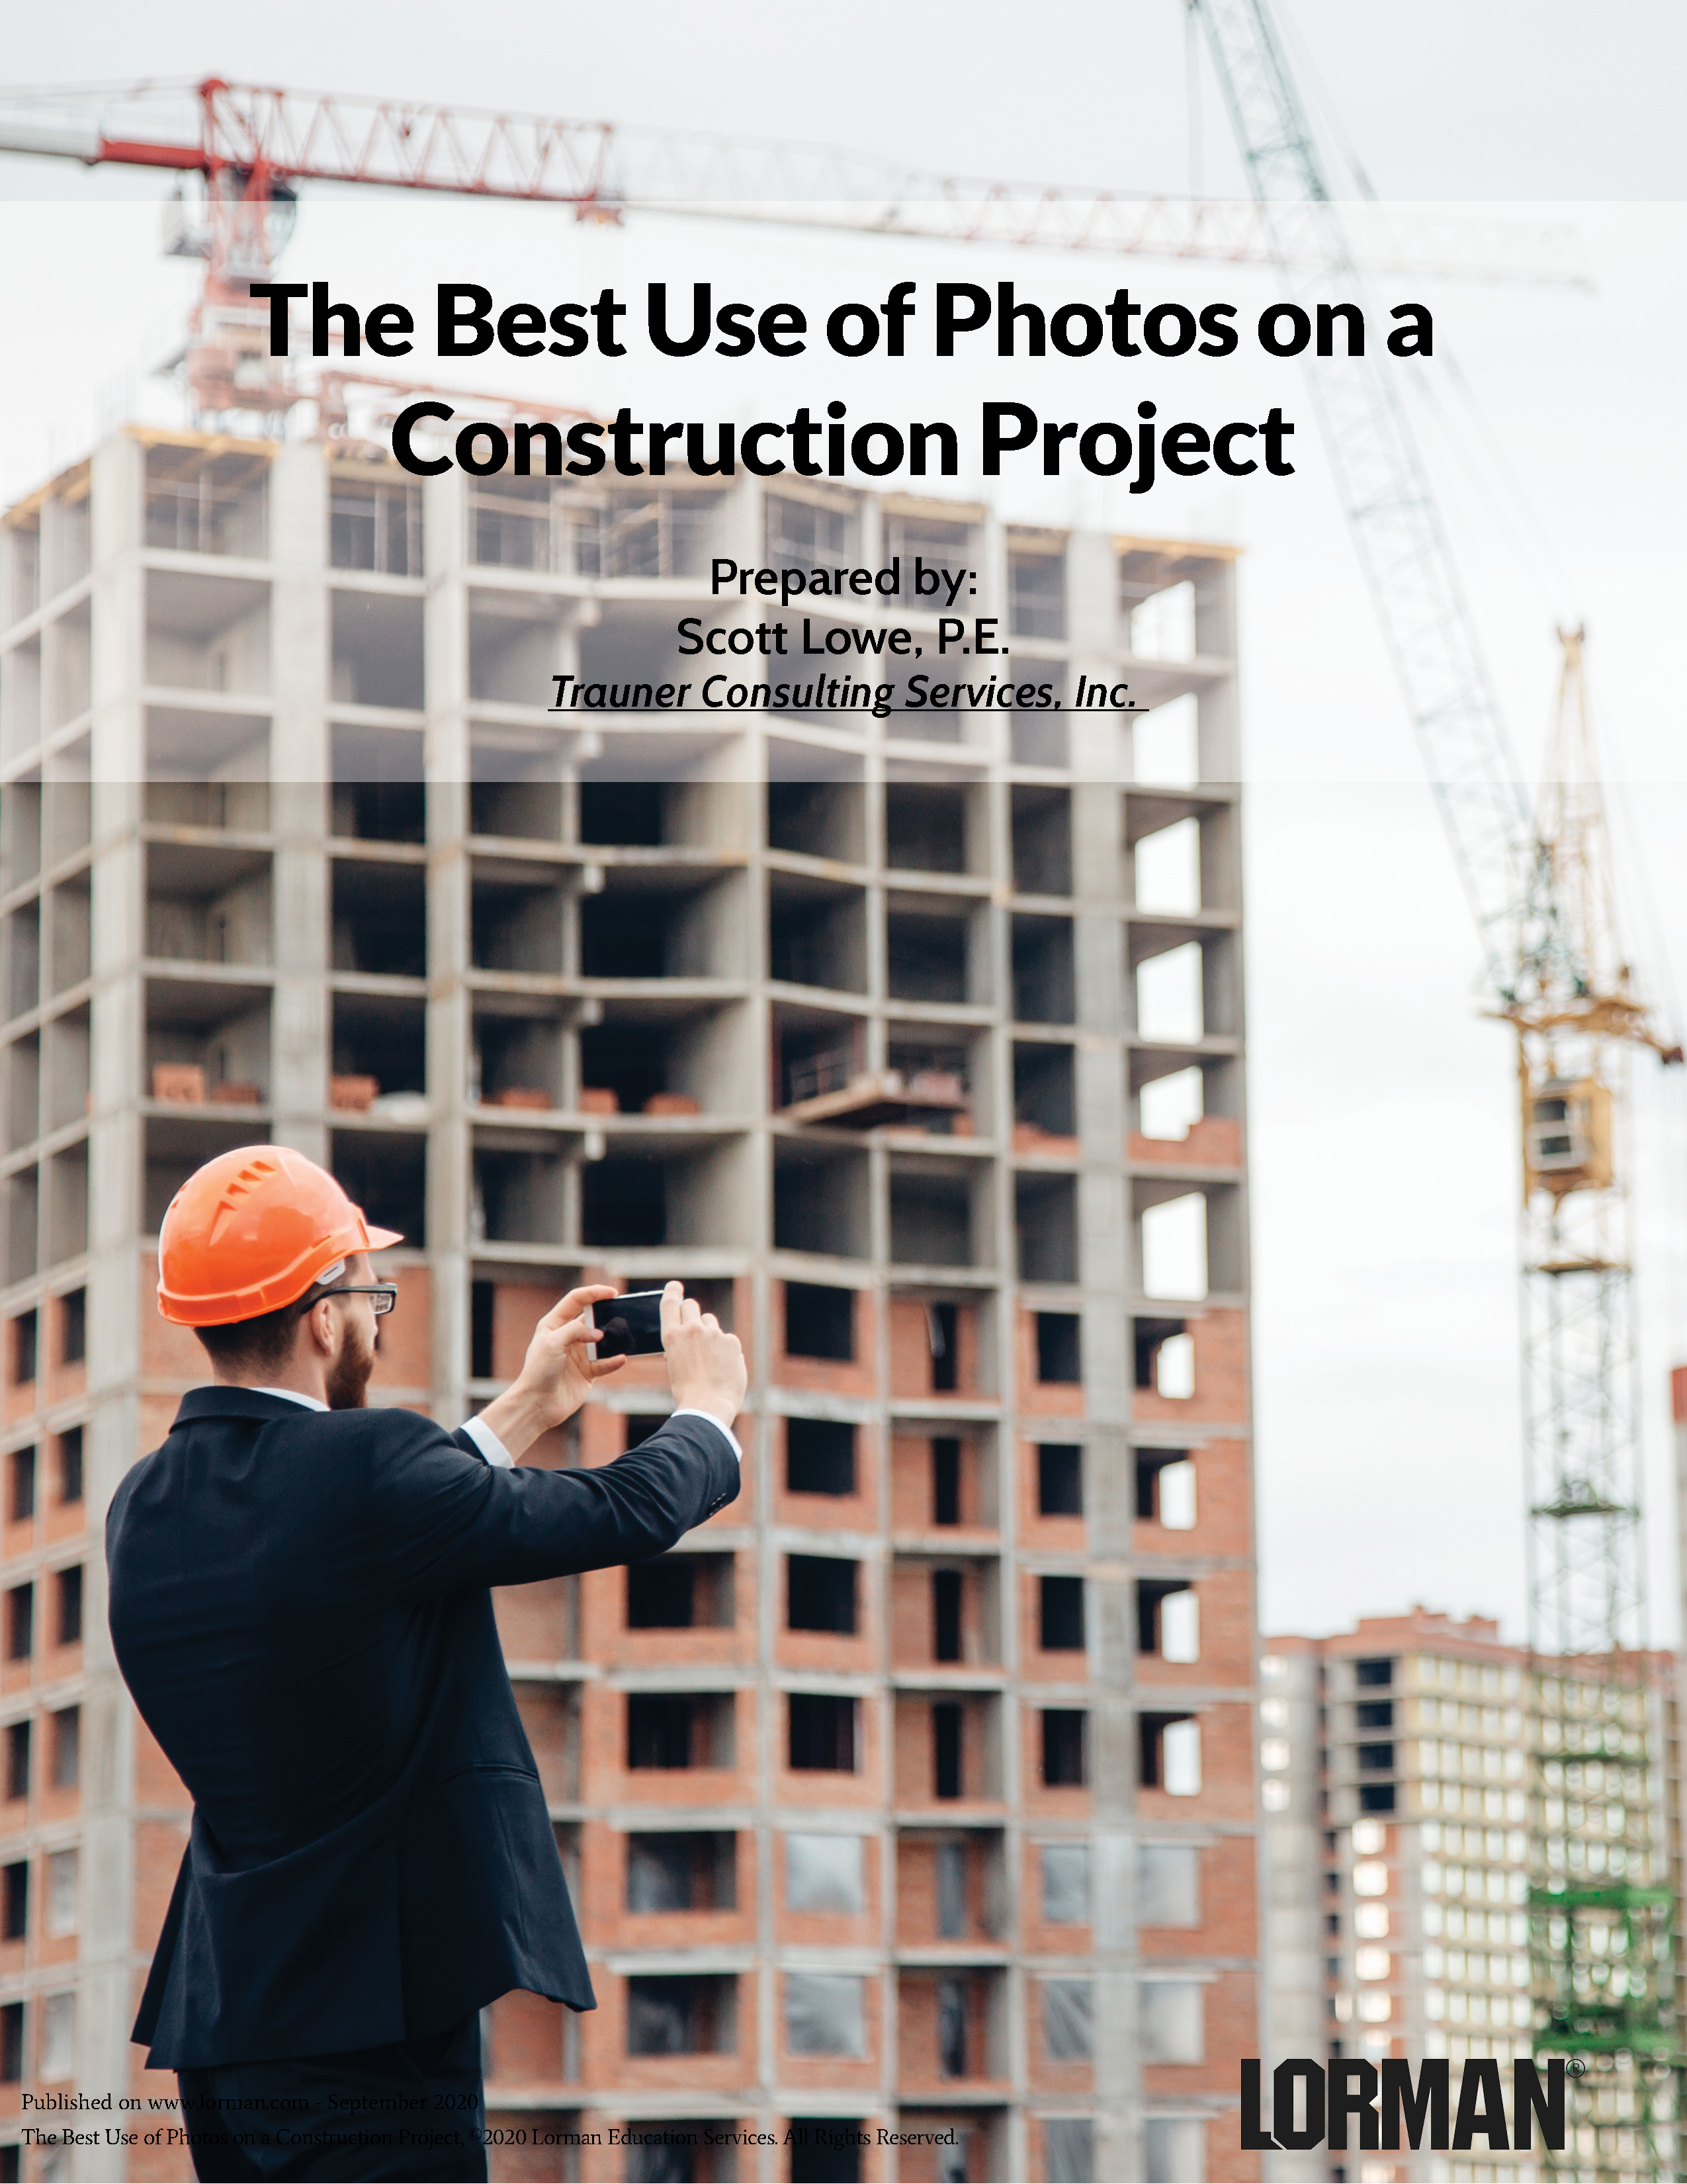 The Best Use of Photos on a Construction Project